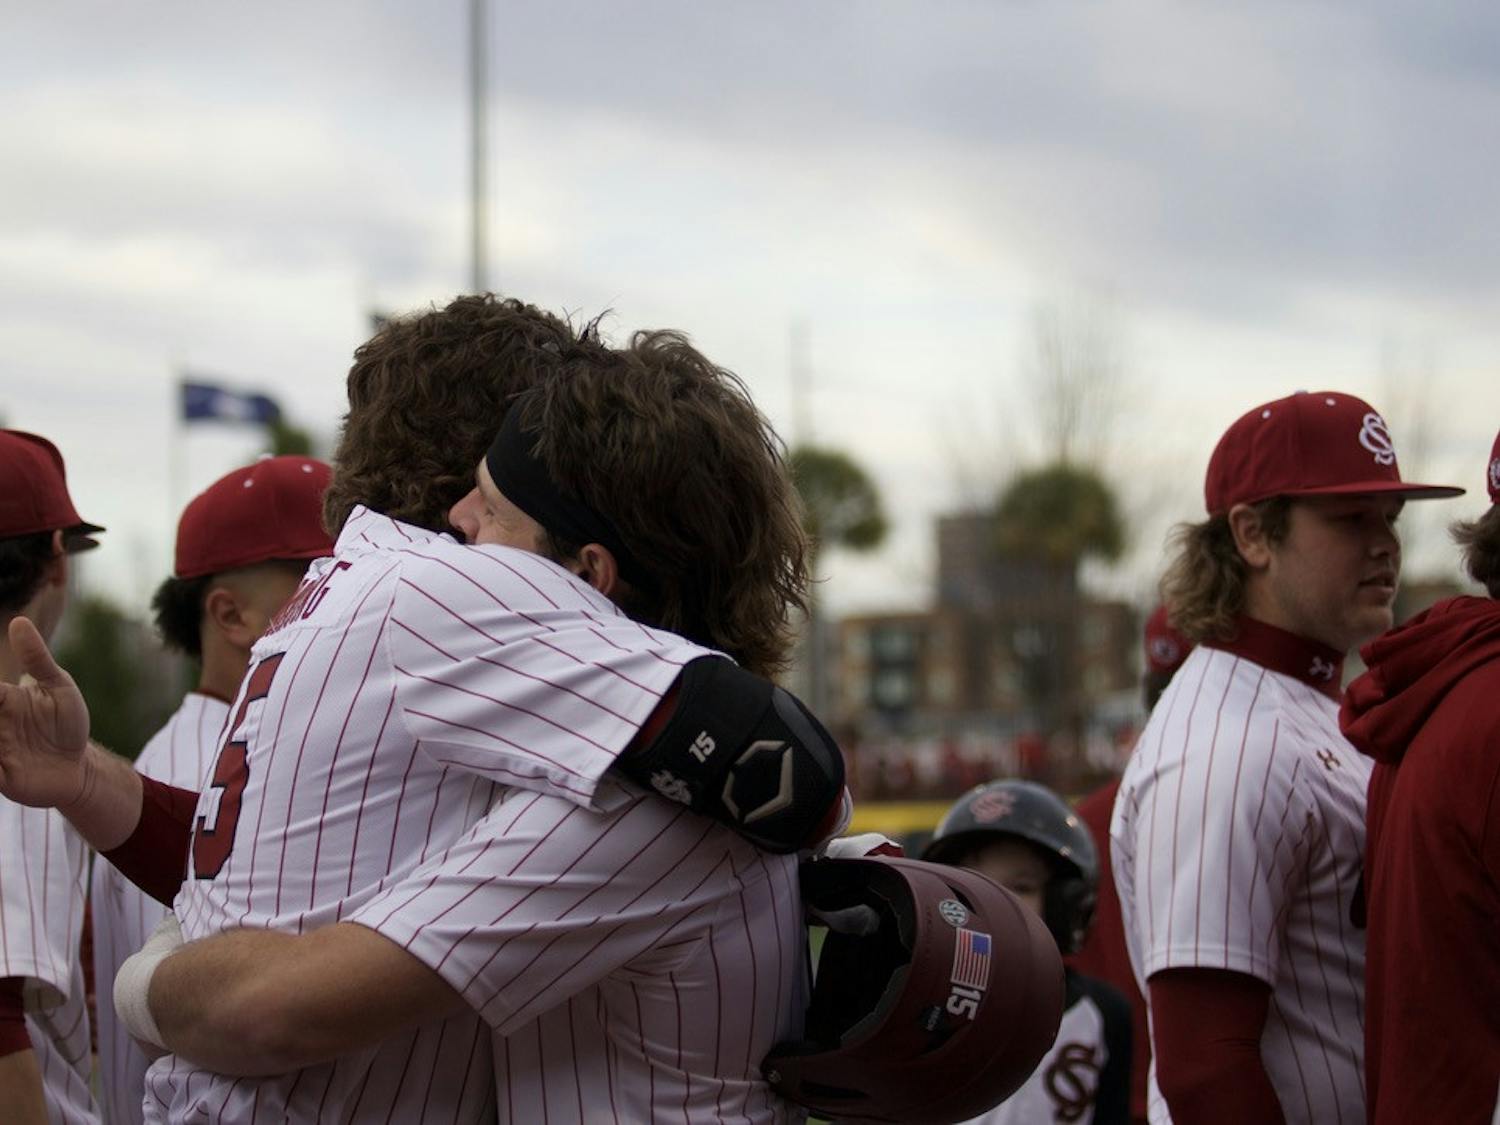 Sophomore outfielder Carson Hornung and sophomore catcher Cole Messina share a celebratory hug during the Gamecocks matchup versus UMass Lowell. South Carolina defeated the Riverhawks 20-3 on opening day on Feb. 17, 2023.  